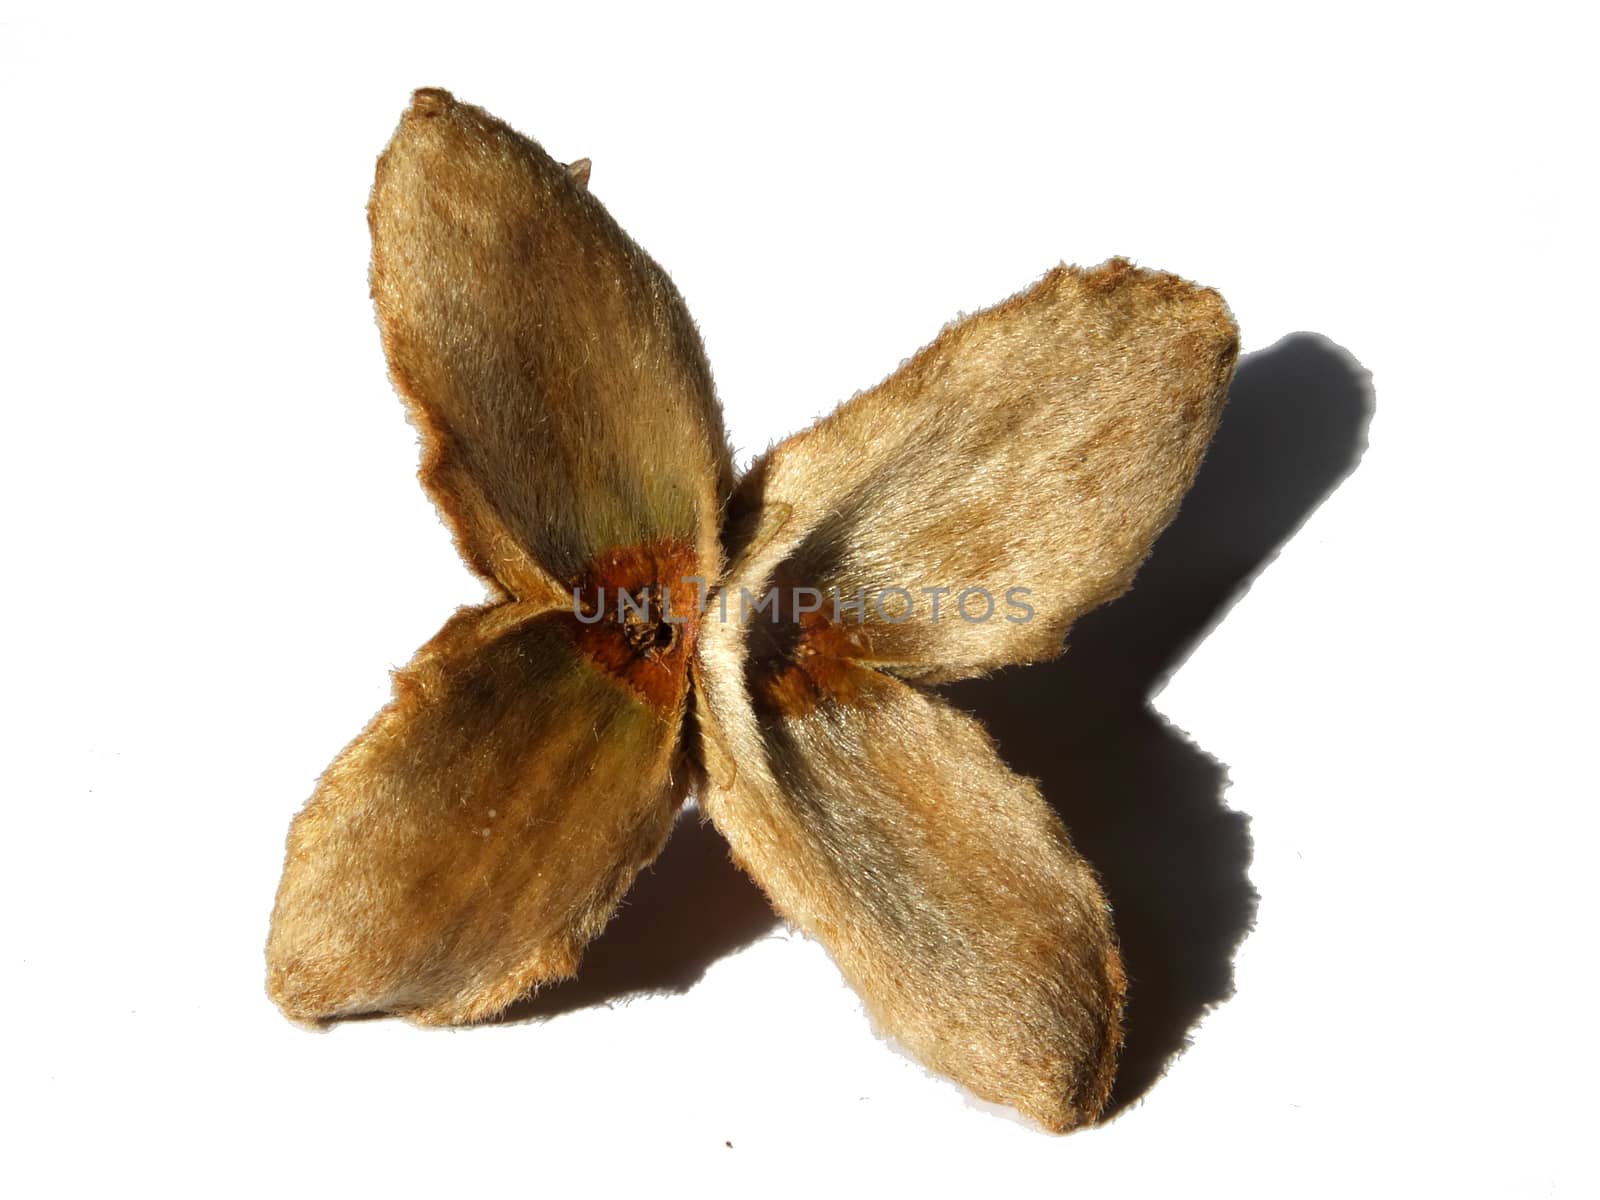 an open beech nut husk on a white background with shadow